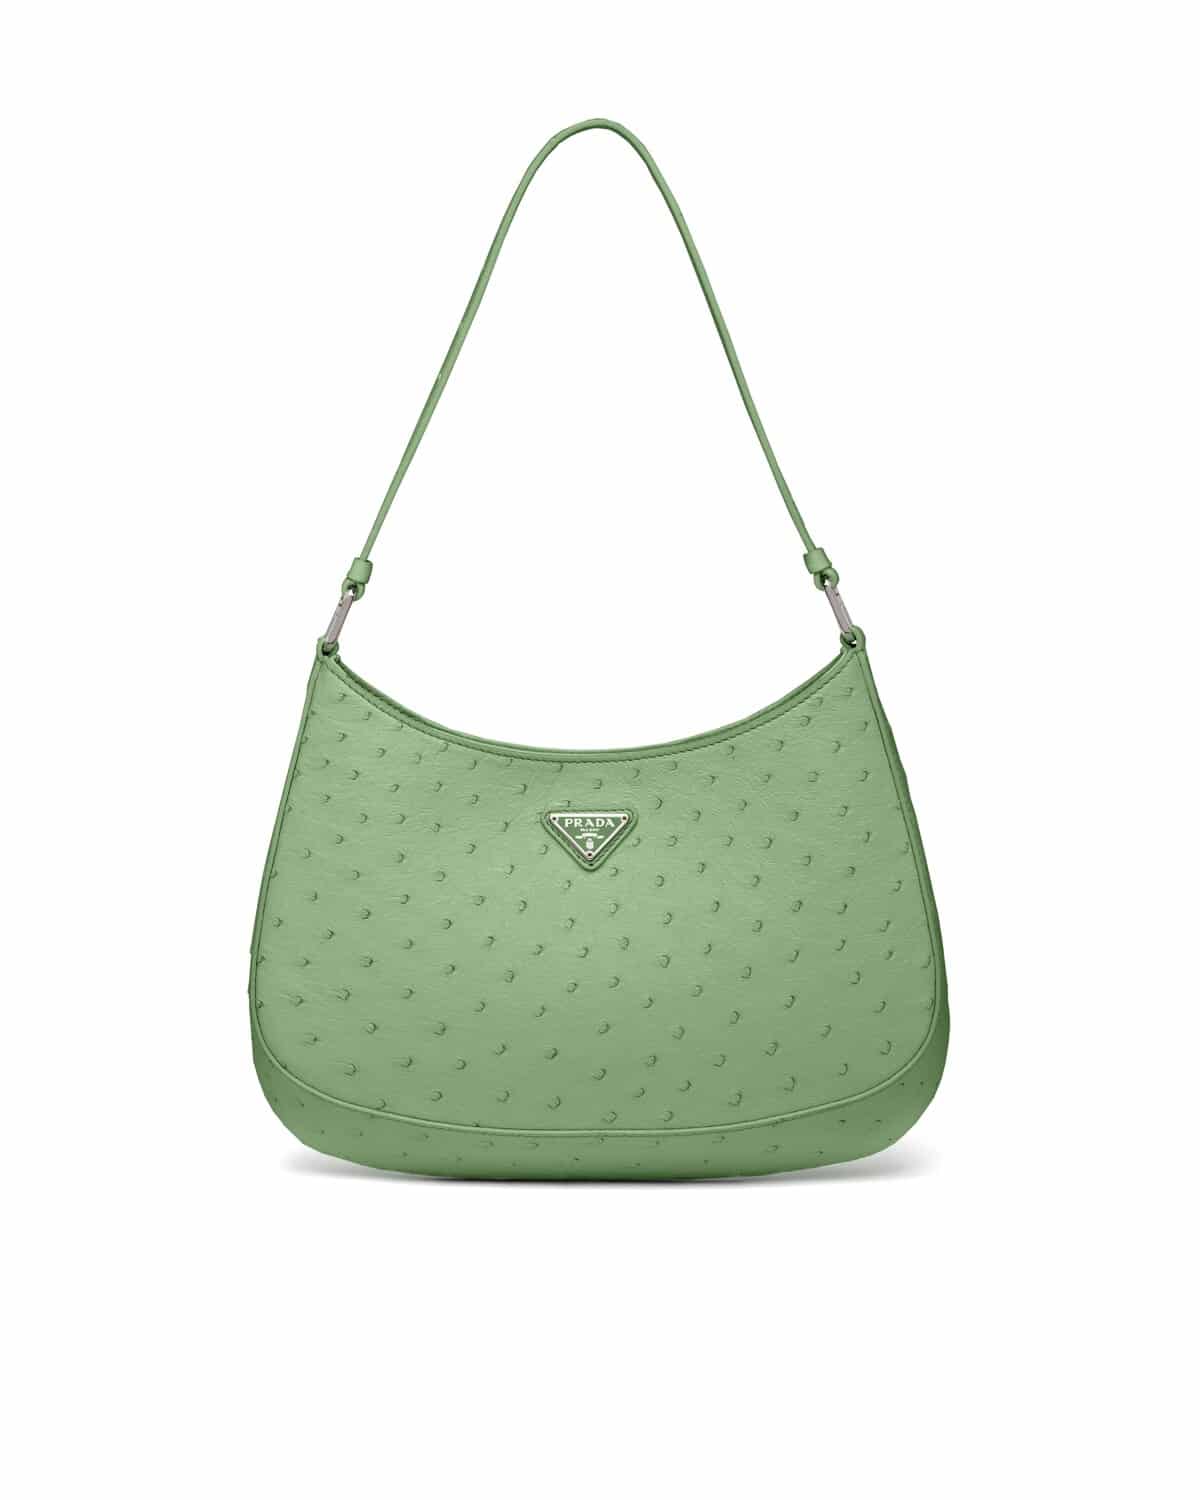 Cleo Small Leather Shoulder Bag in Green - Prada